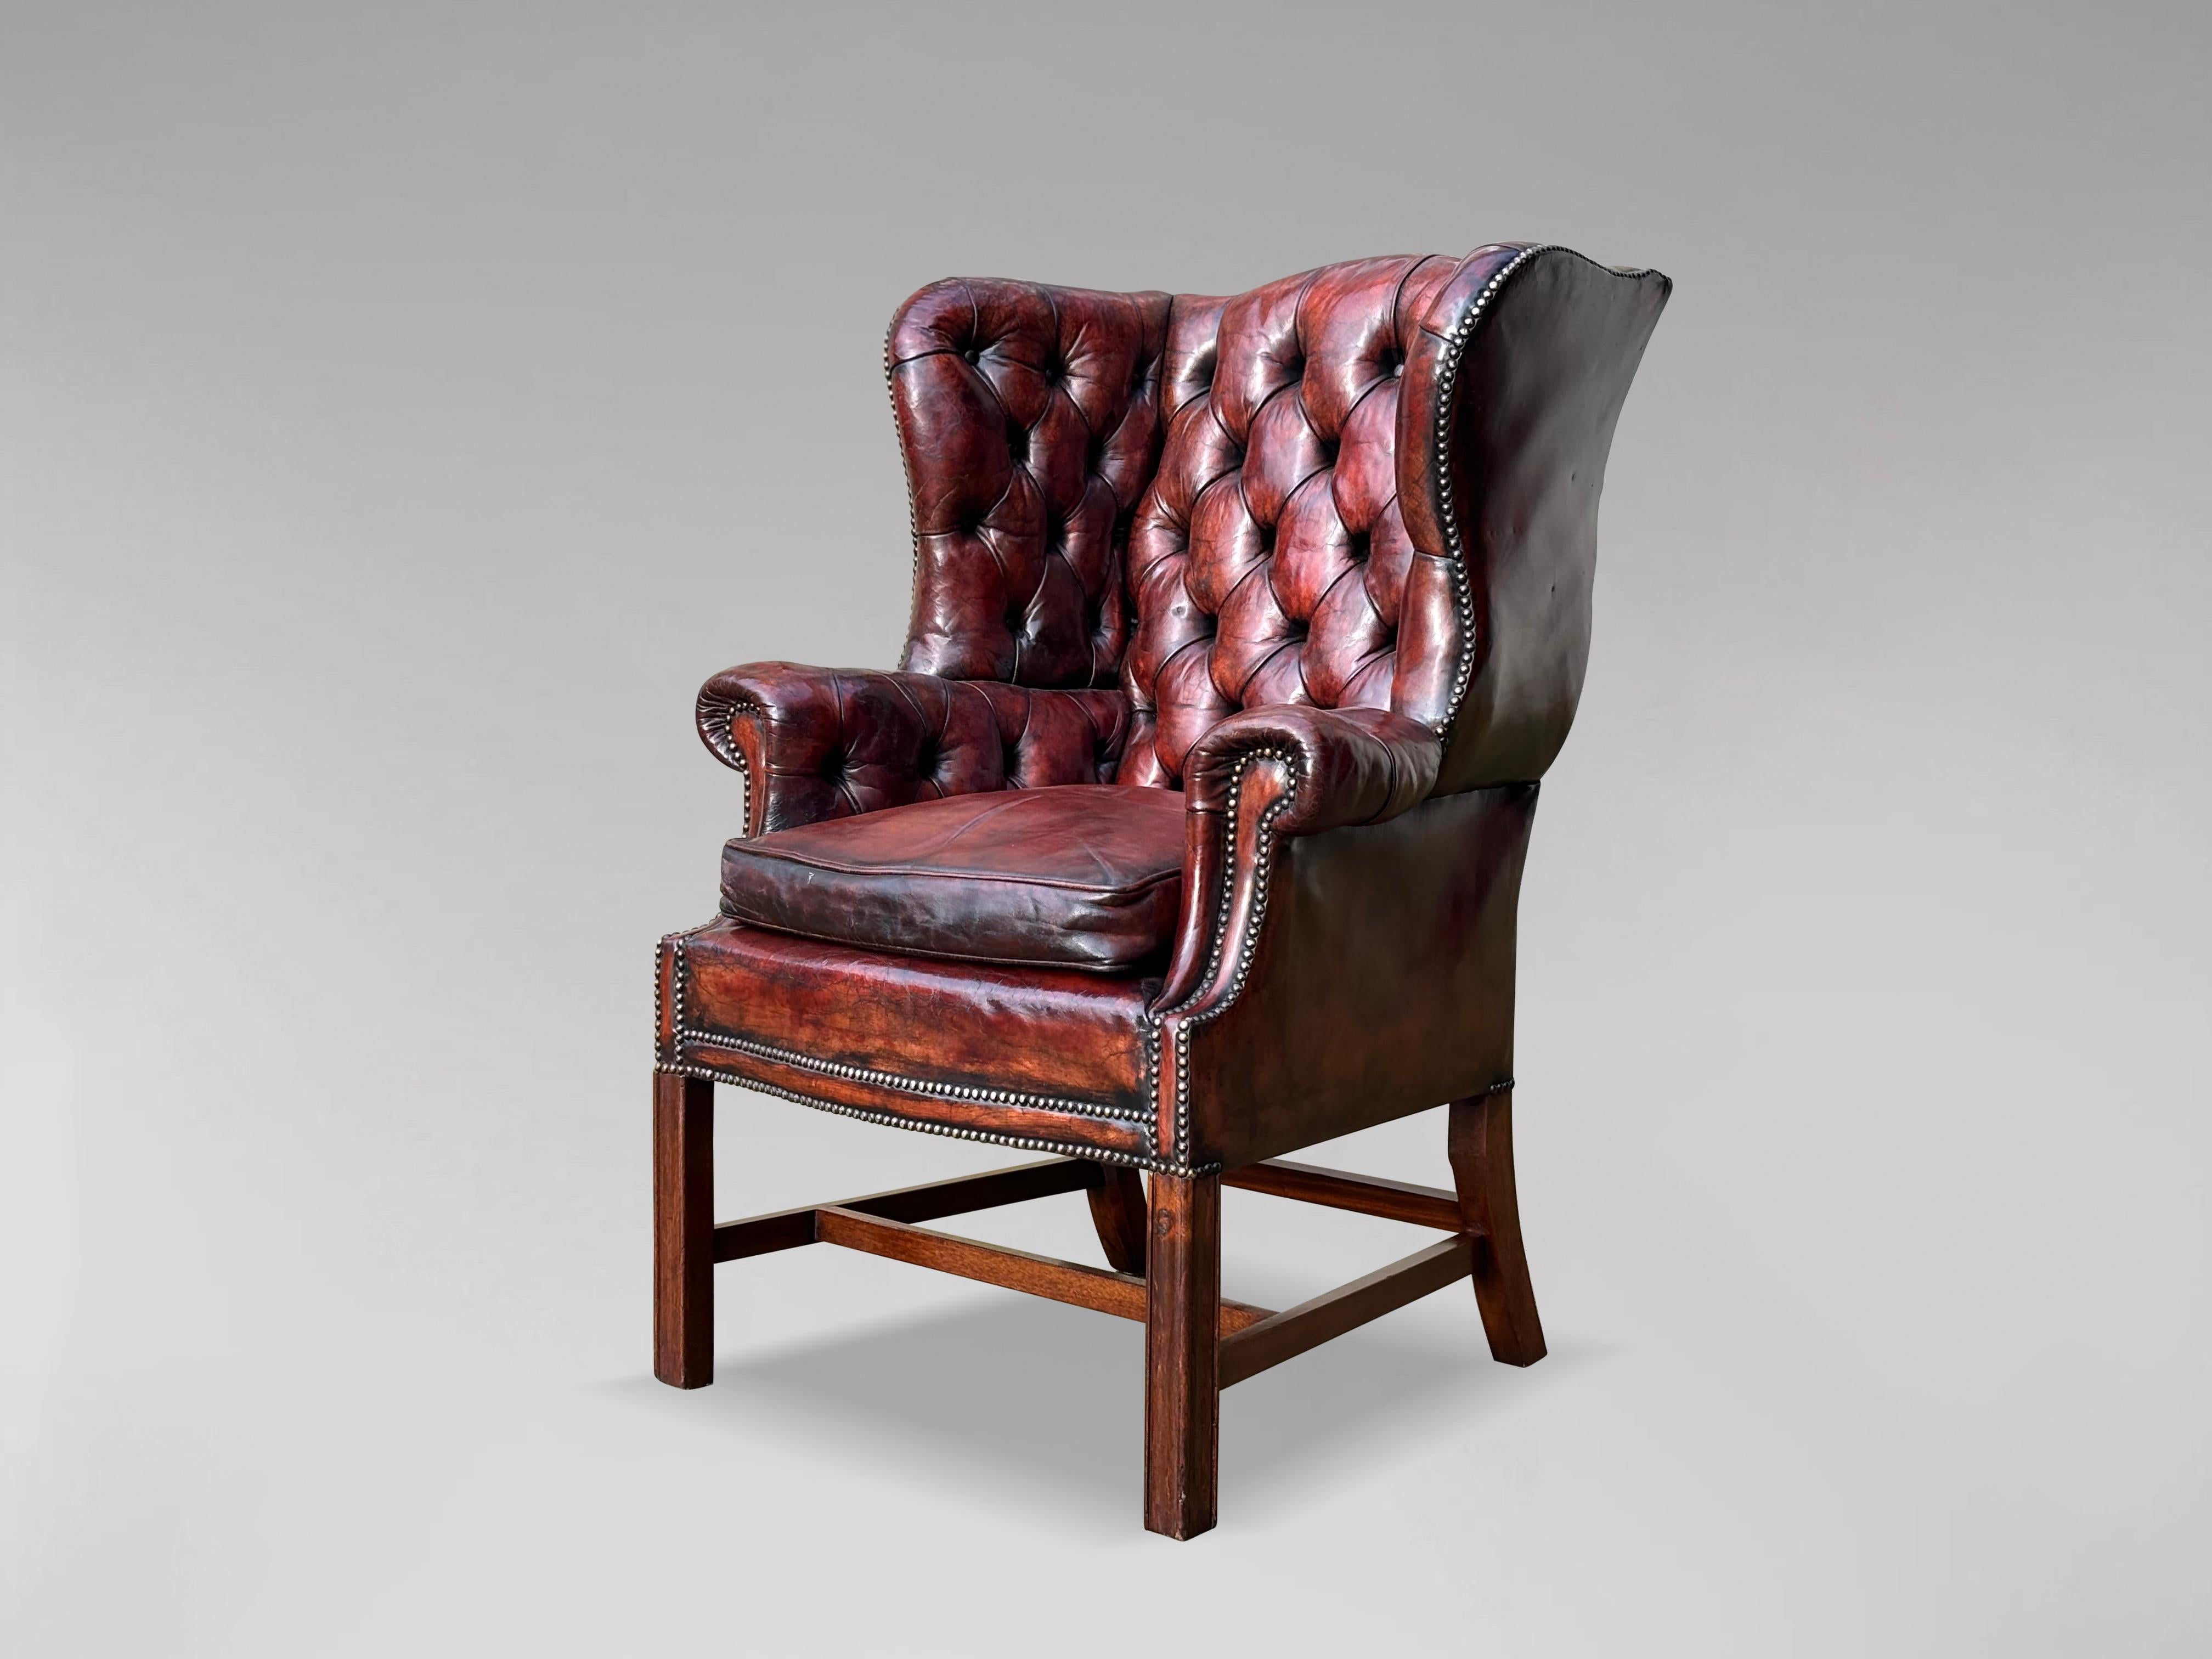 A good quality late 19th century burgundy brown leather wing armchair, George III style shape with square tapering legs, H-frame stretchers, with buttoned back and loose feathered cushion. Lovely patina and very comfortable.

The measurements